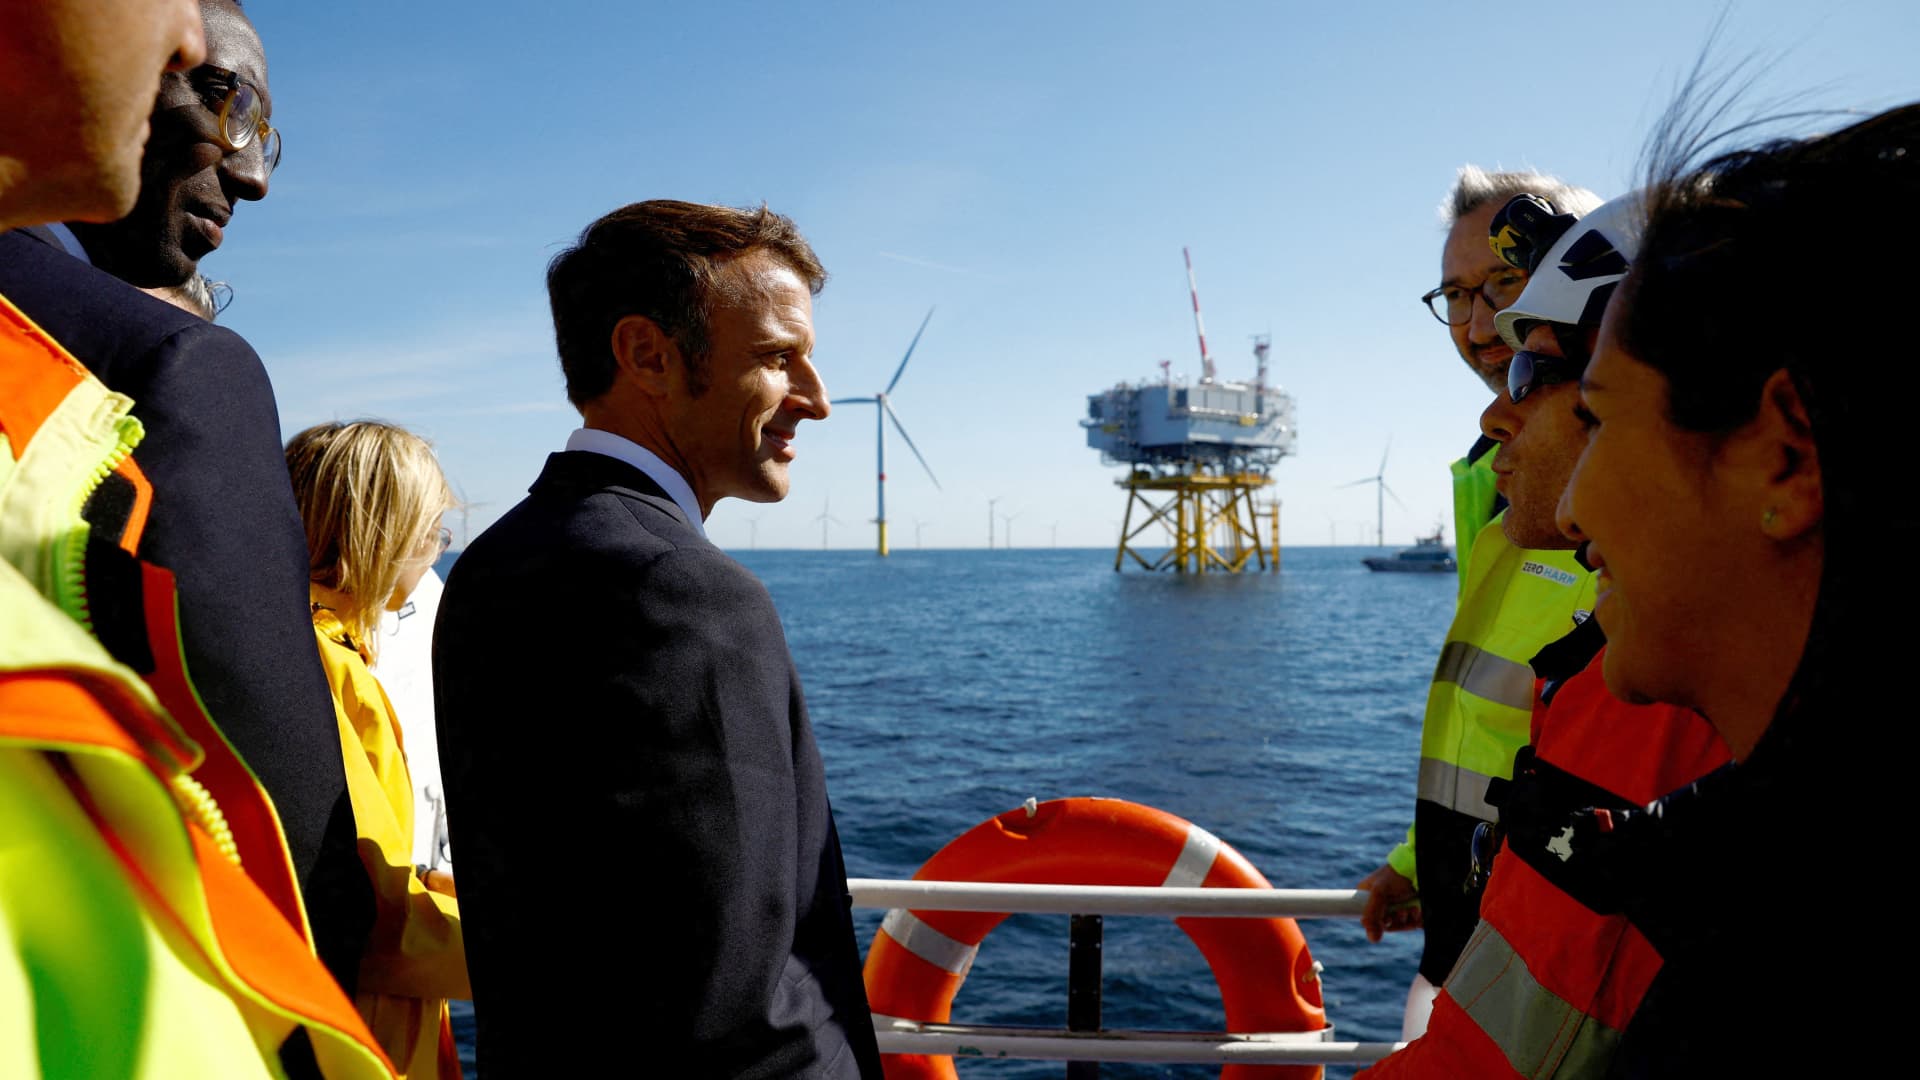 After decades as a nuclear powerhouse, France makes its play in offshore wind